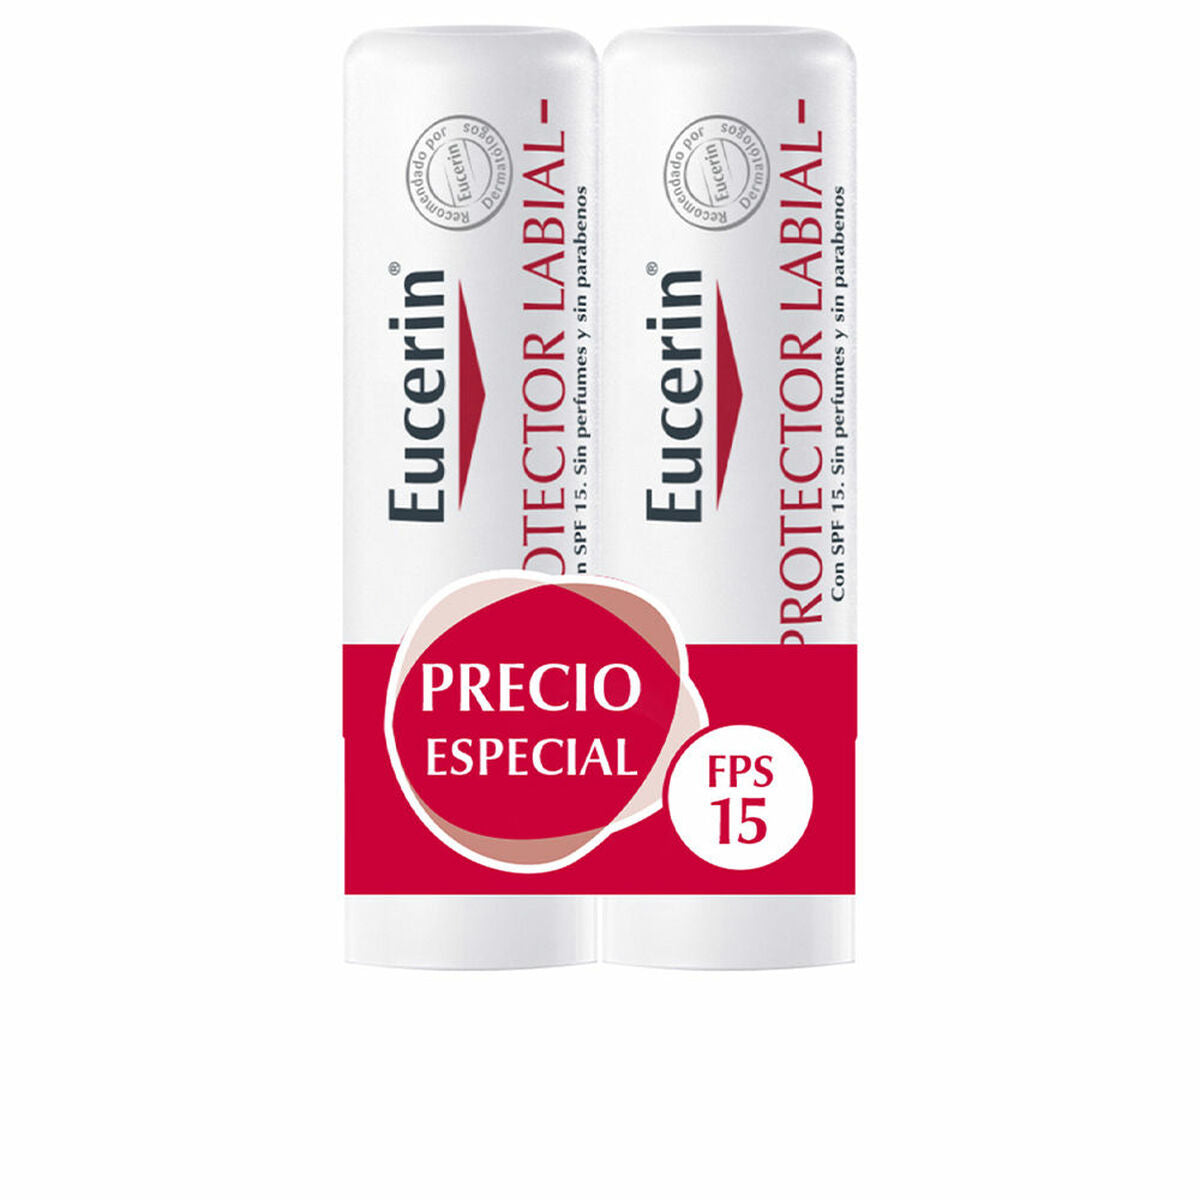 Lip balm Eucerin Protector Labial Lote 2 Units Spf 15 Pack 4,8 g-0